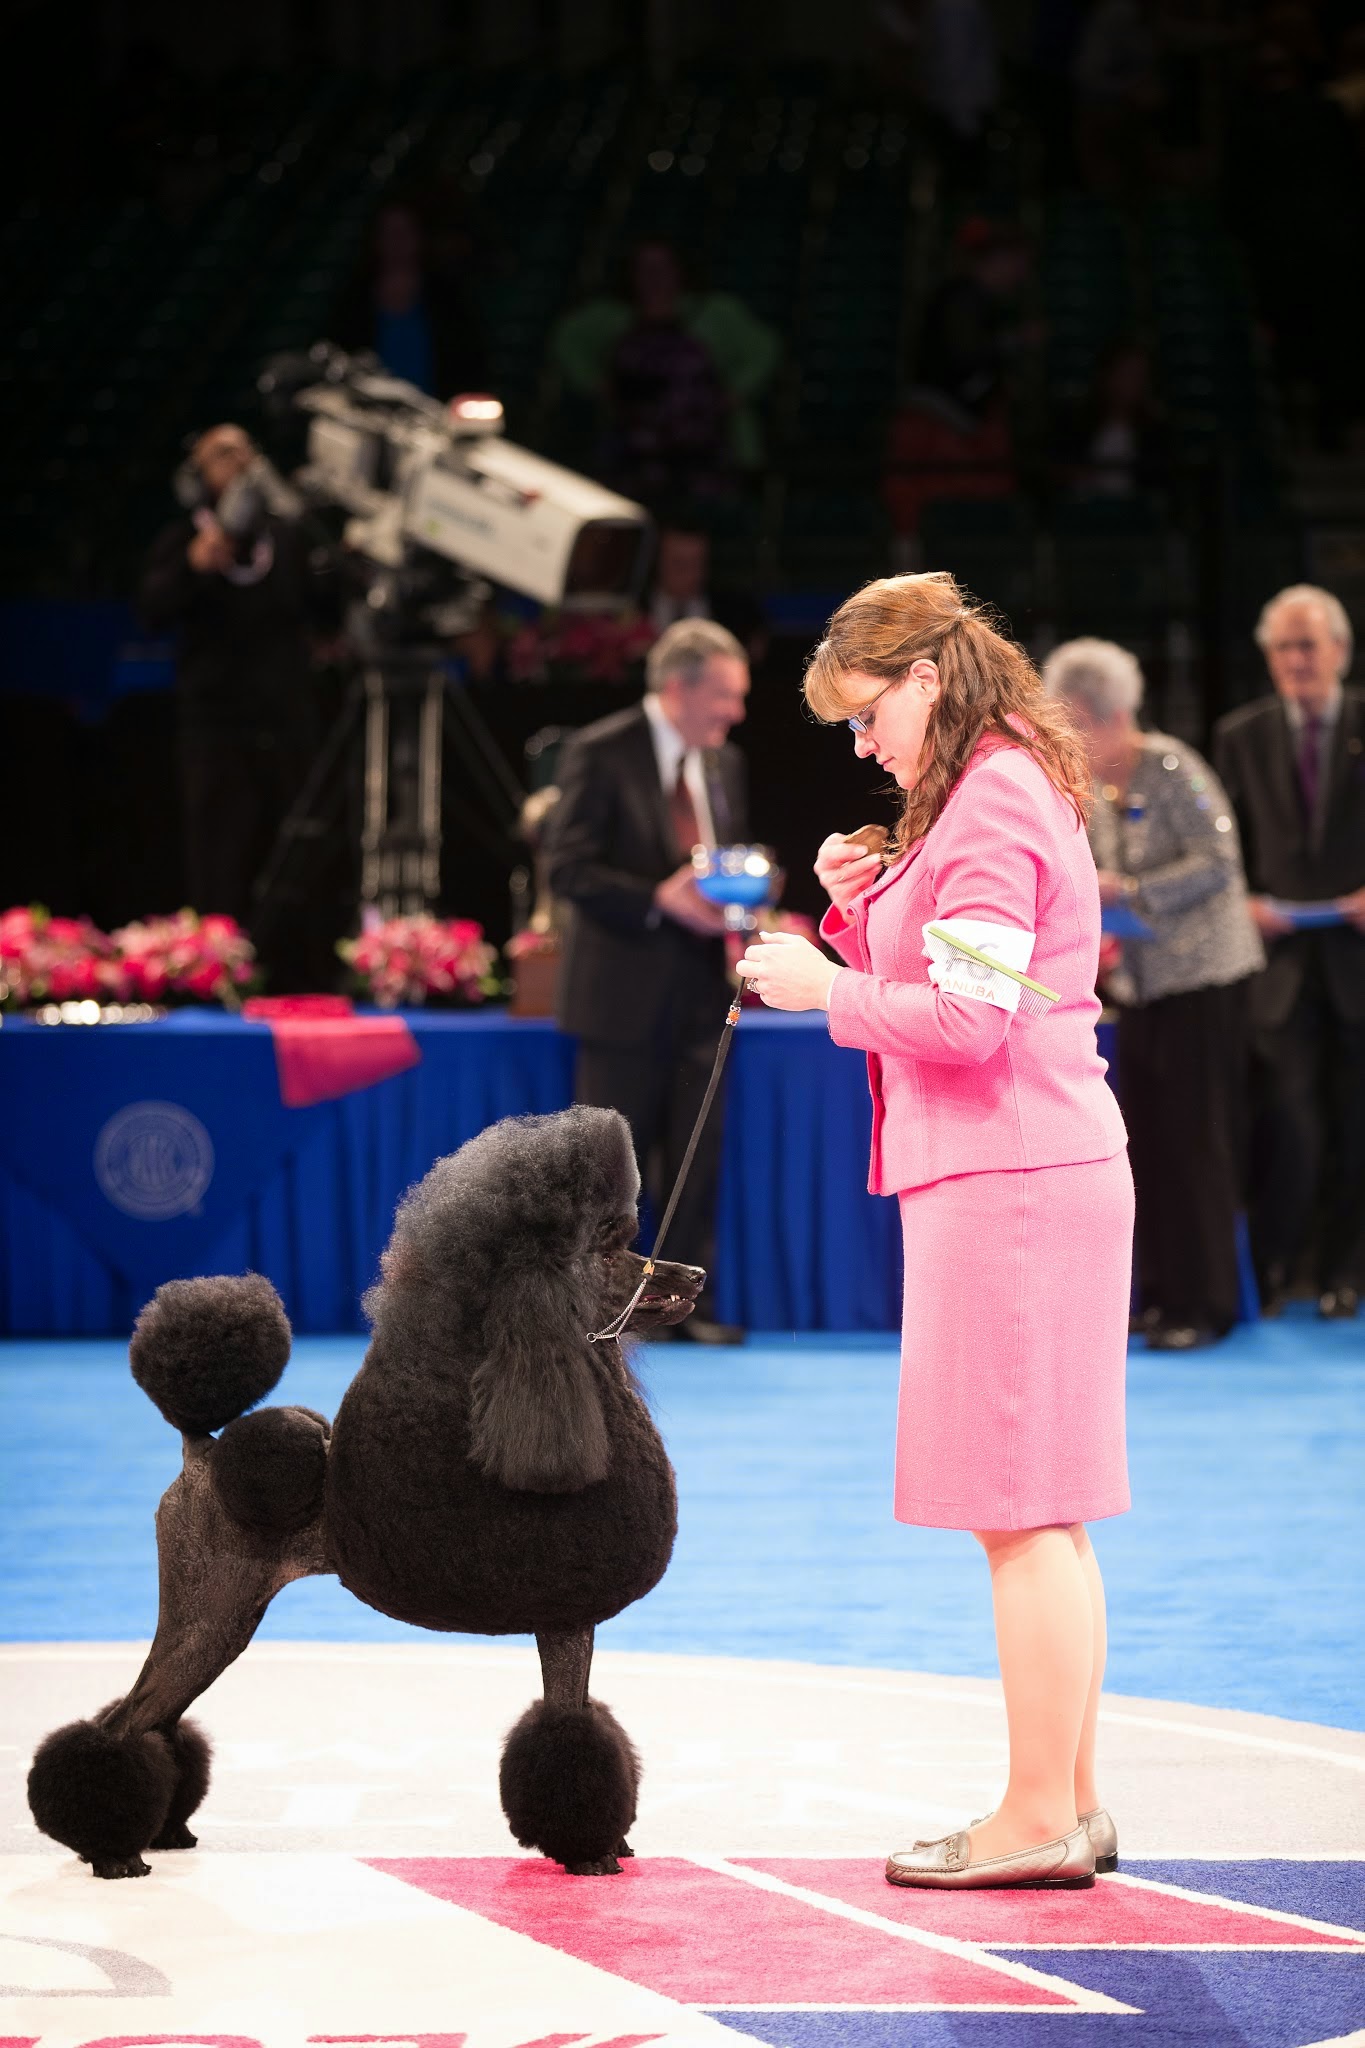 PHOTO: Flame, a poodle, at the AKC/Eukanuba National Championship back in 2013.